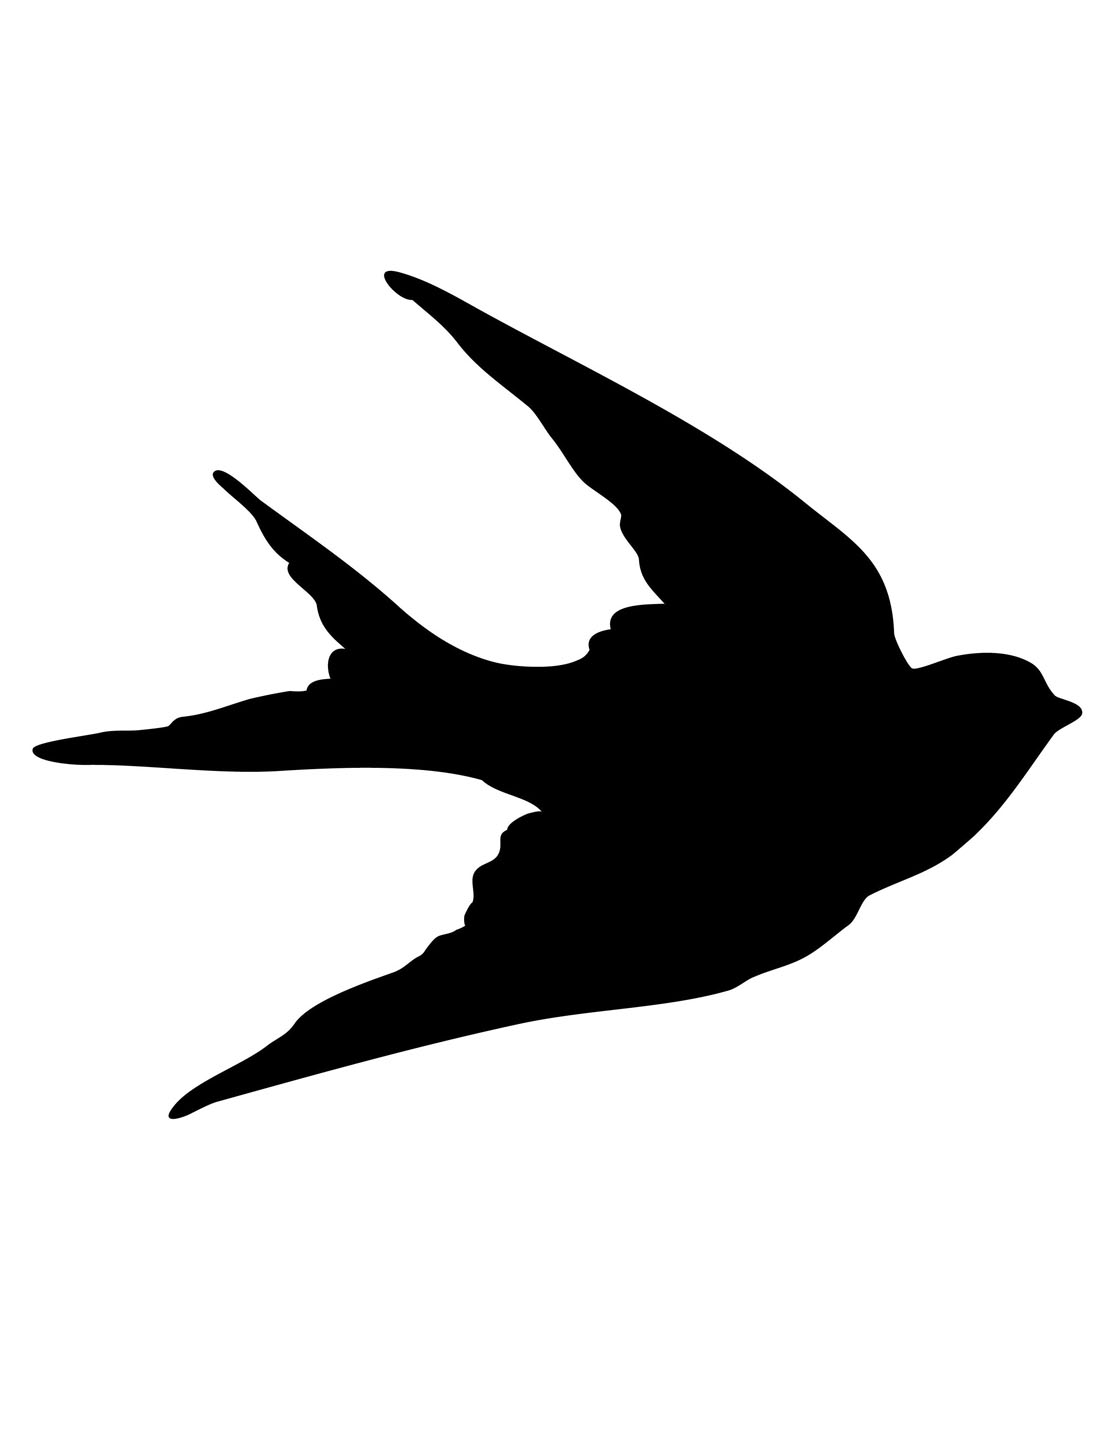 Swallow silhouette image